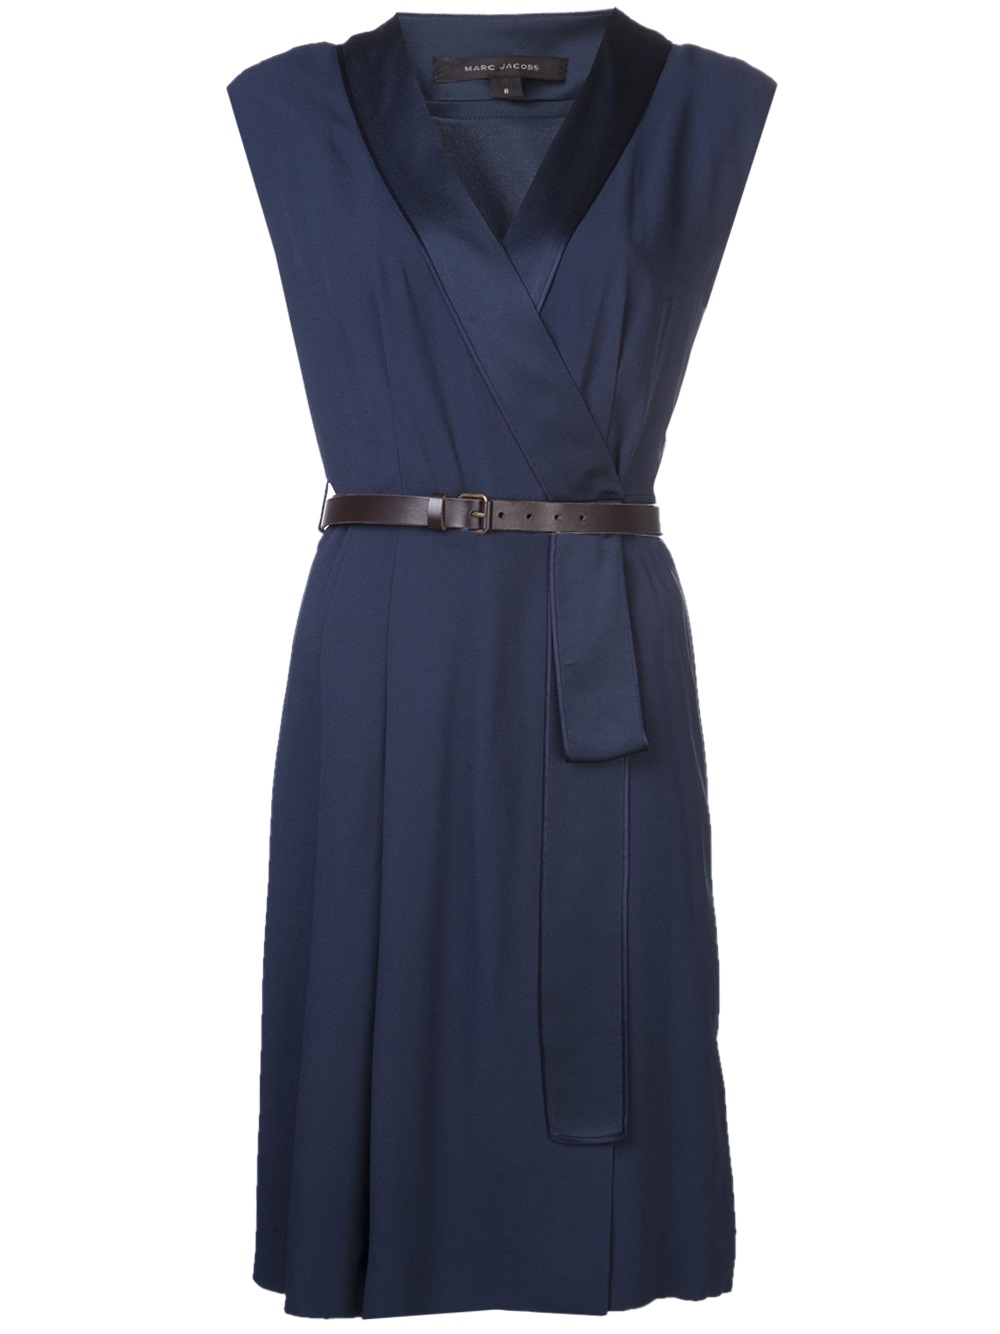 Marc jacobs Belted Wrap Dress in Blue | Lyst